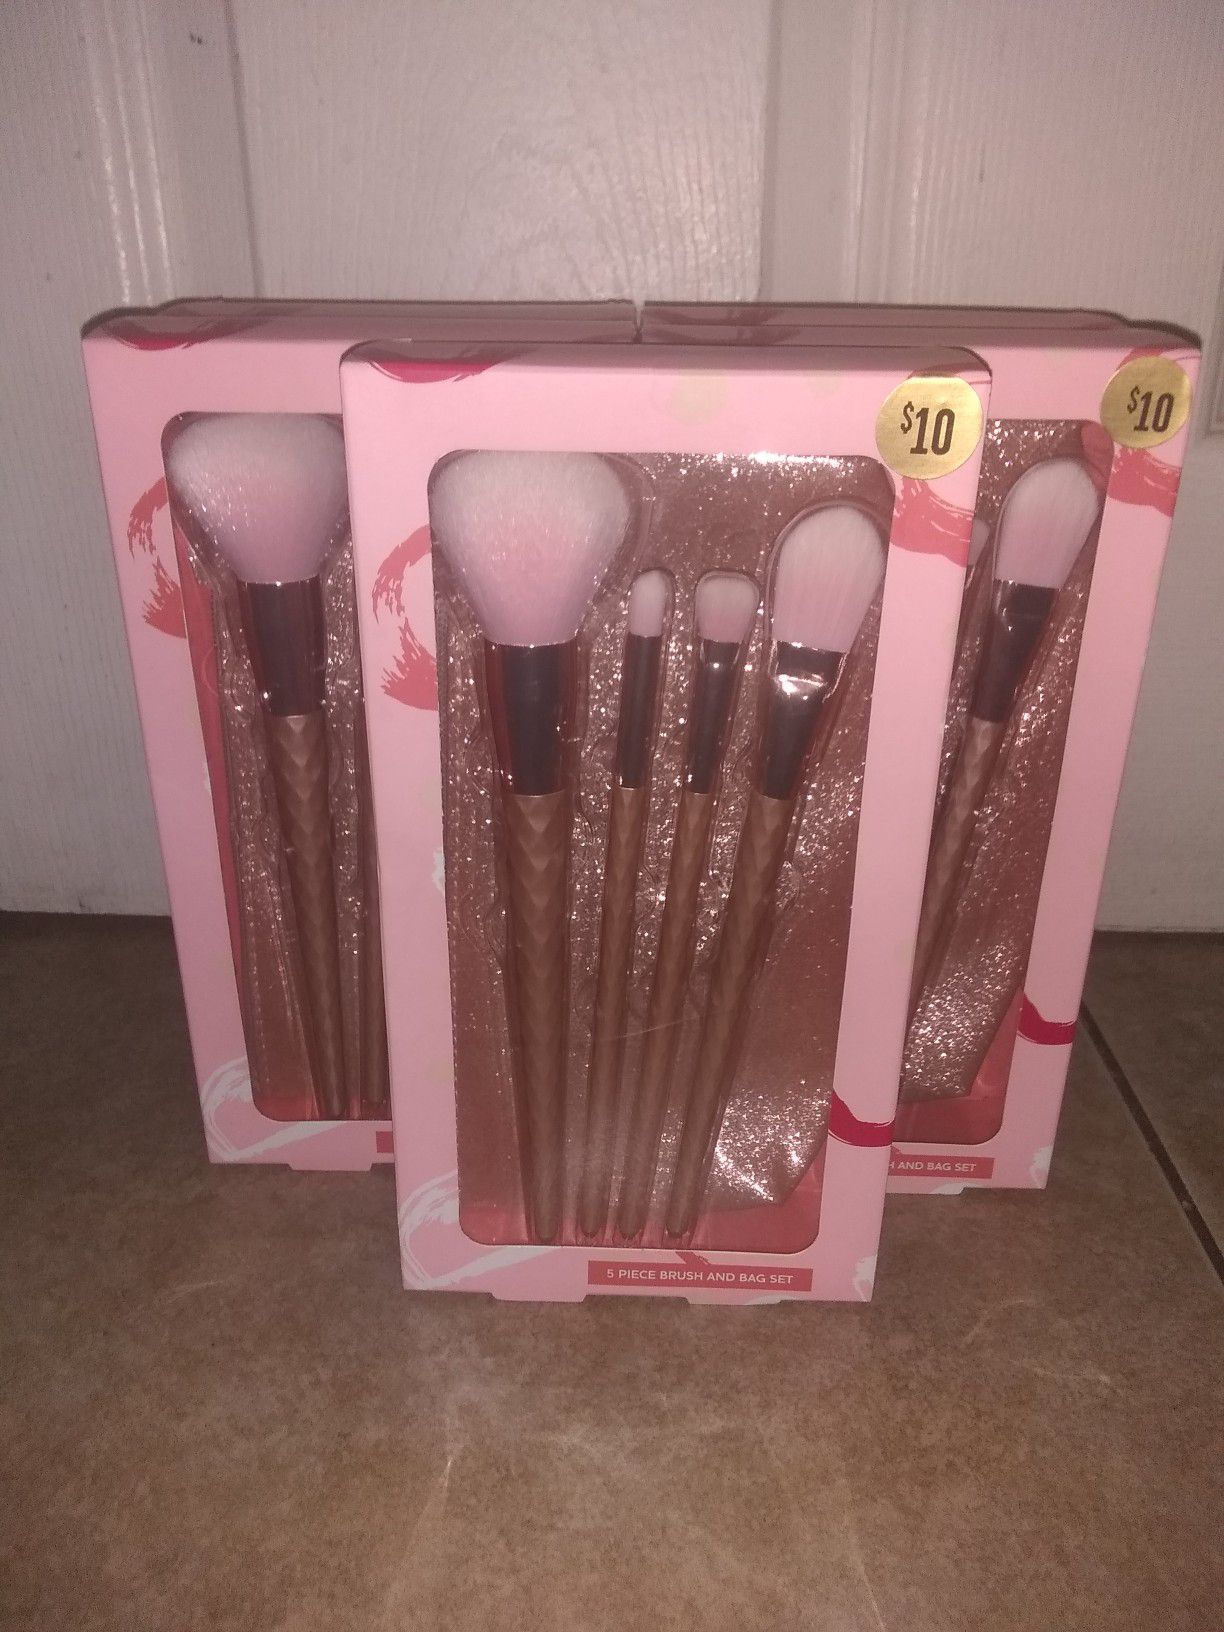 Makeup Brushes $5 Each.